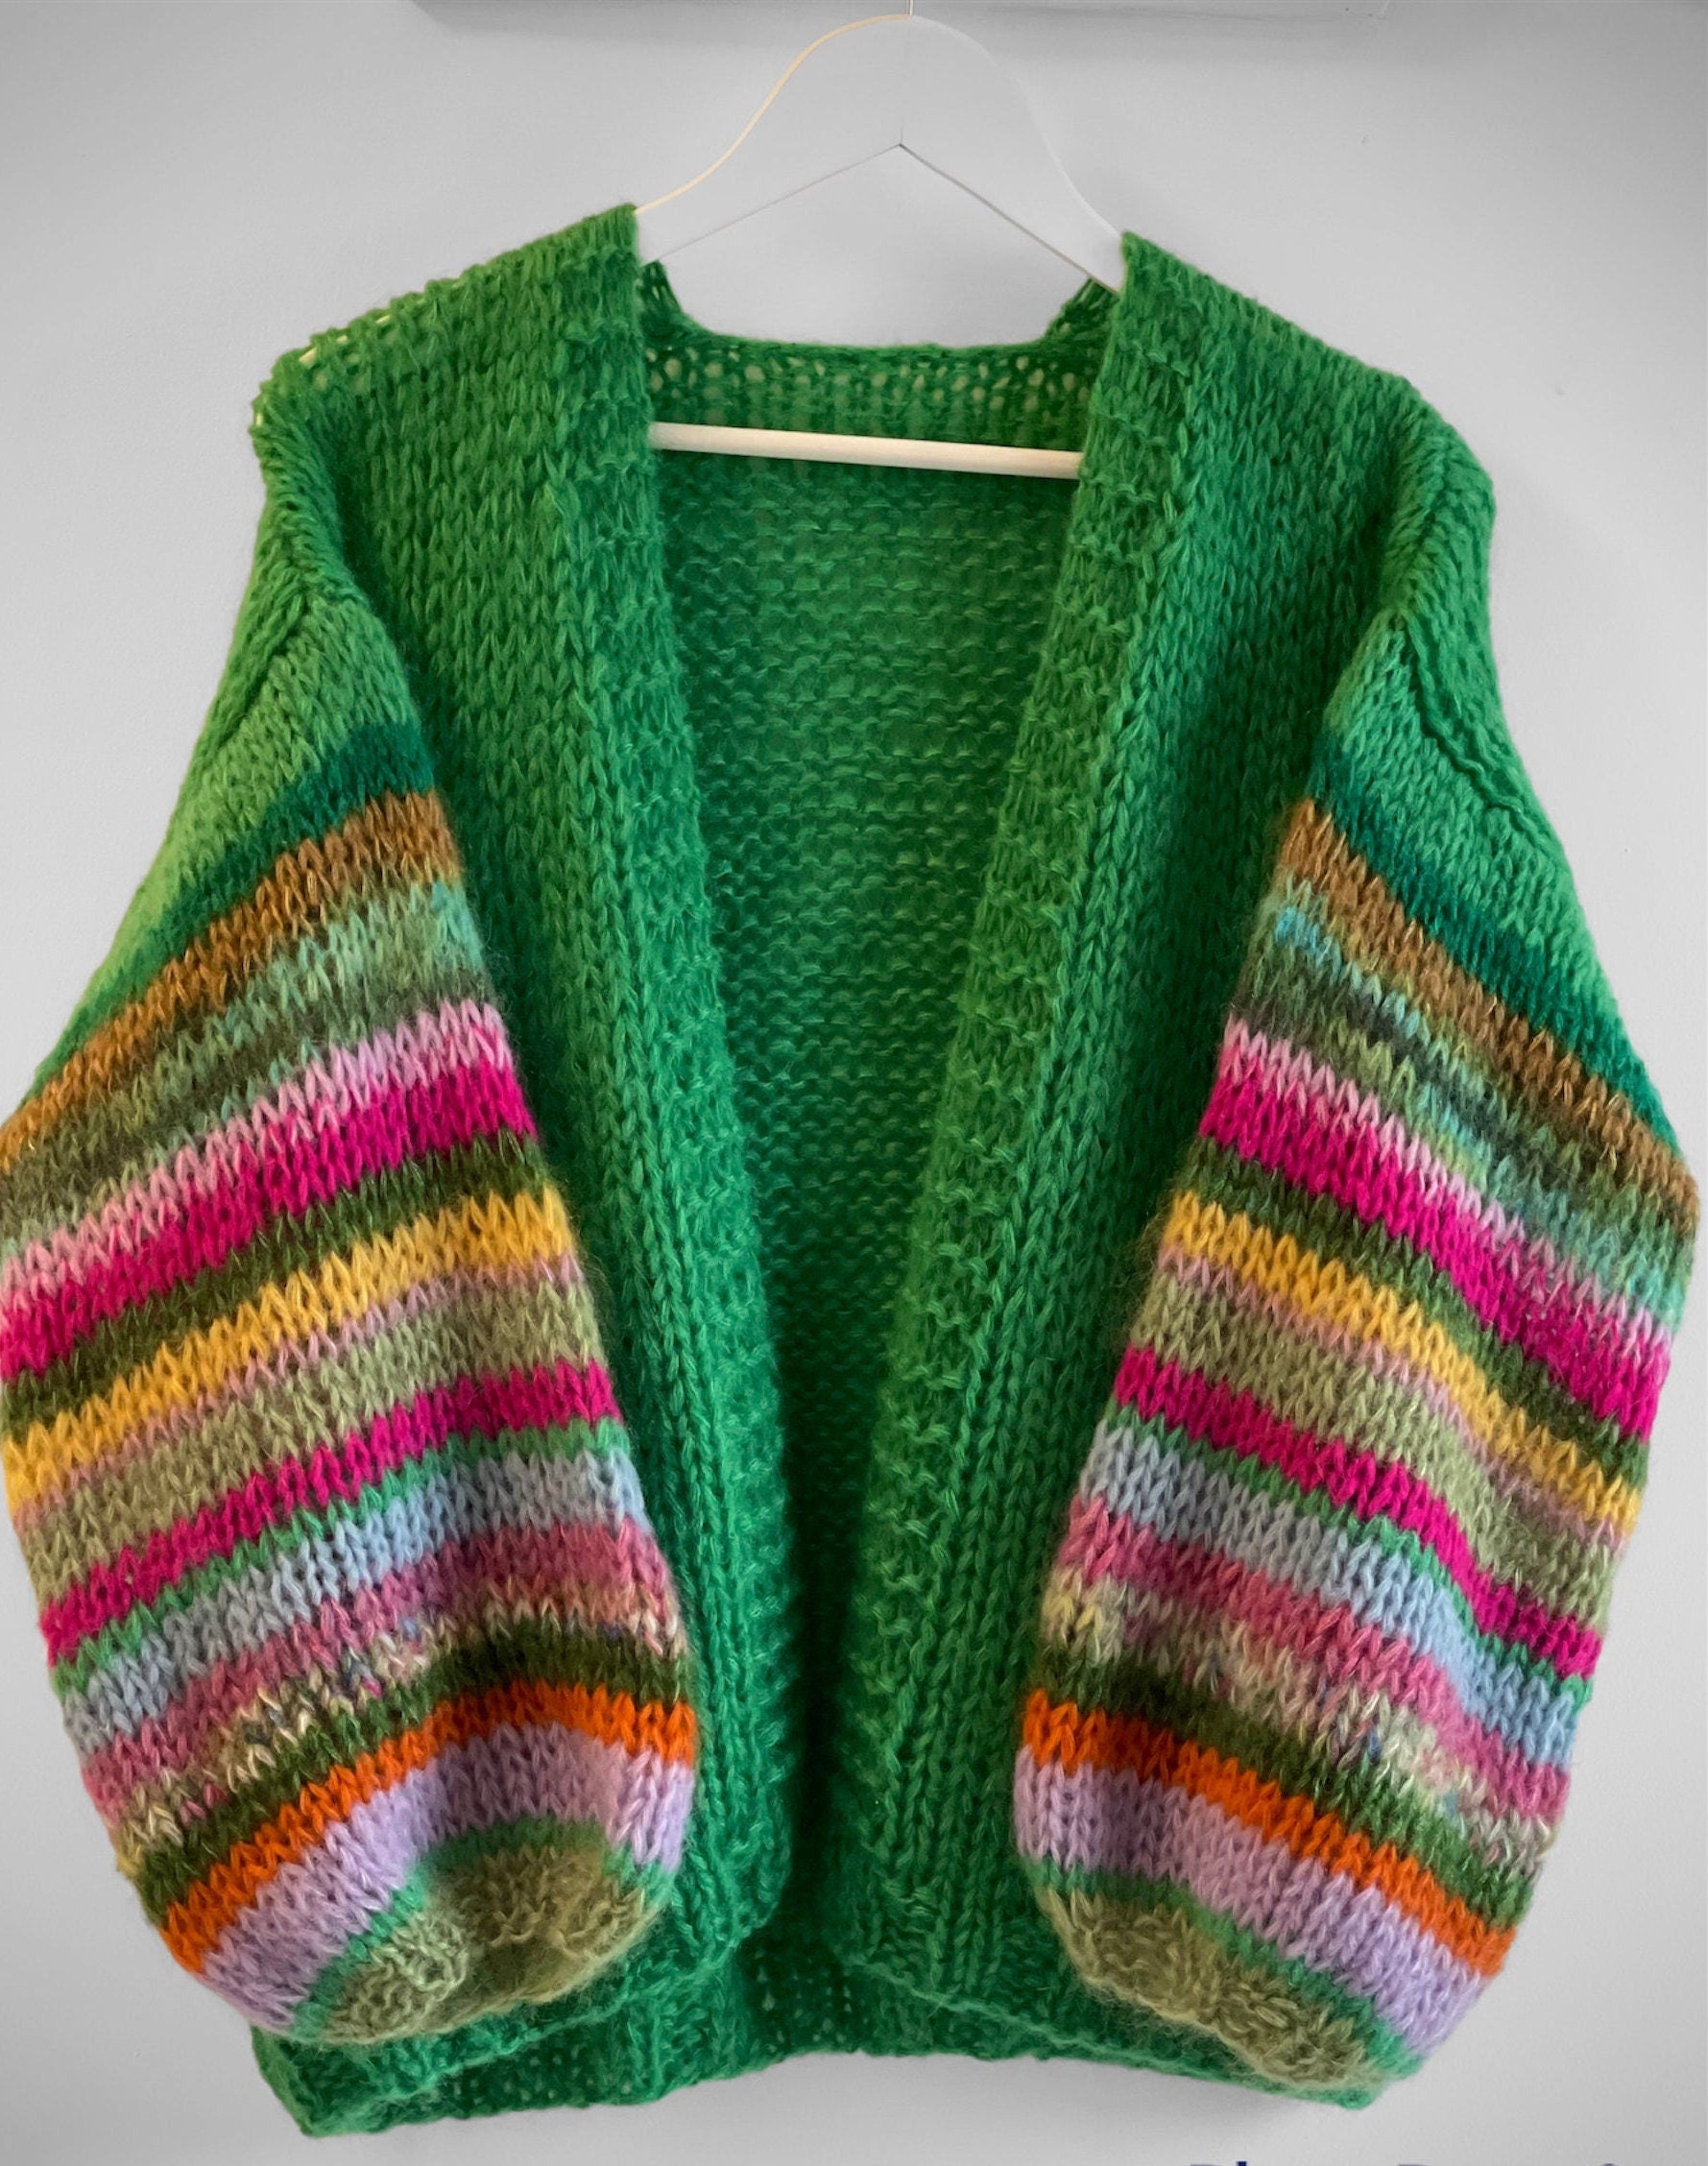 JADE Oversized Mohair Cardigan, Green Cardigan with Balloon Striped Sleeves, Hand Knit